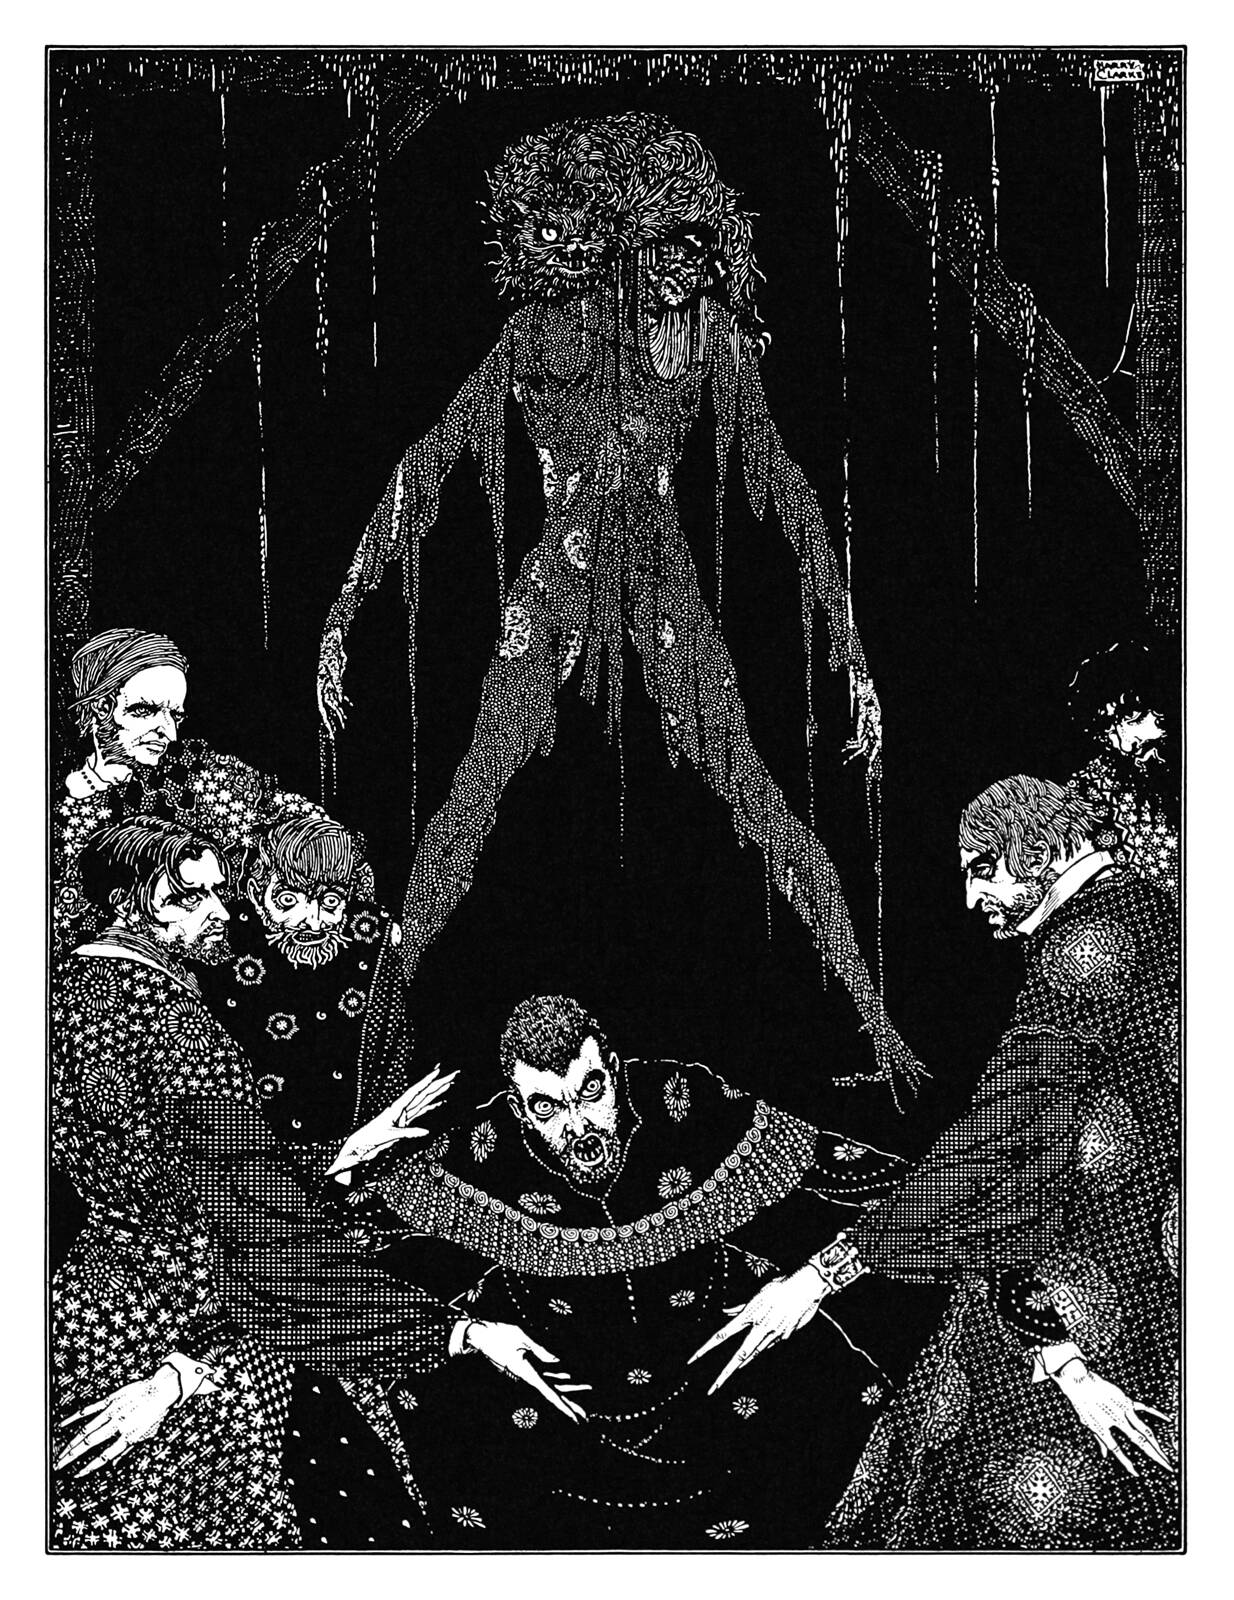 Harry Clarke, The Black Cat from Edgar Allan Poe, Tales of Mystery and Imagination, George G. Harrap and Co., London, 1919, p. 308. Public Domain Review.